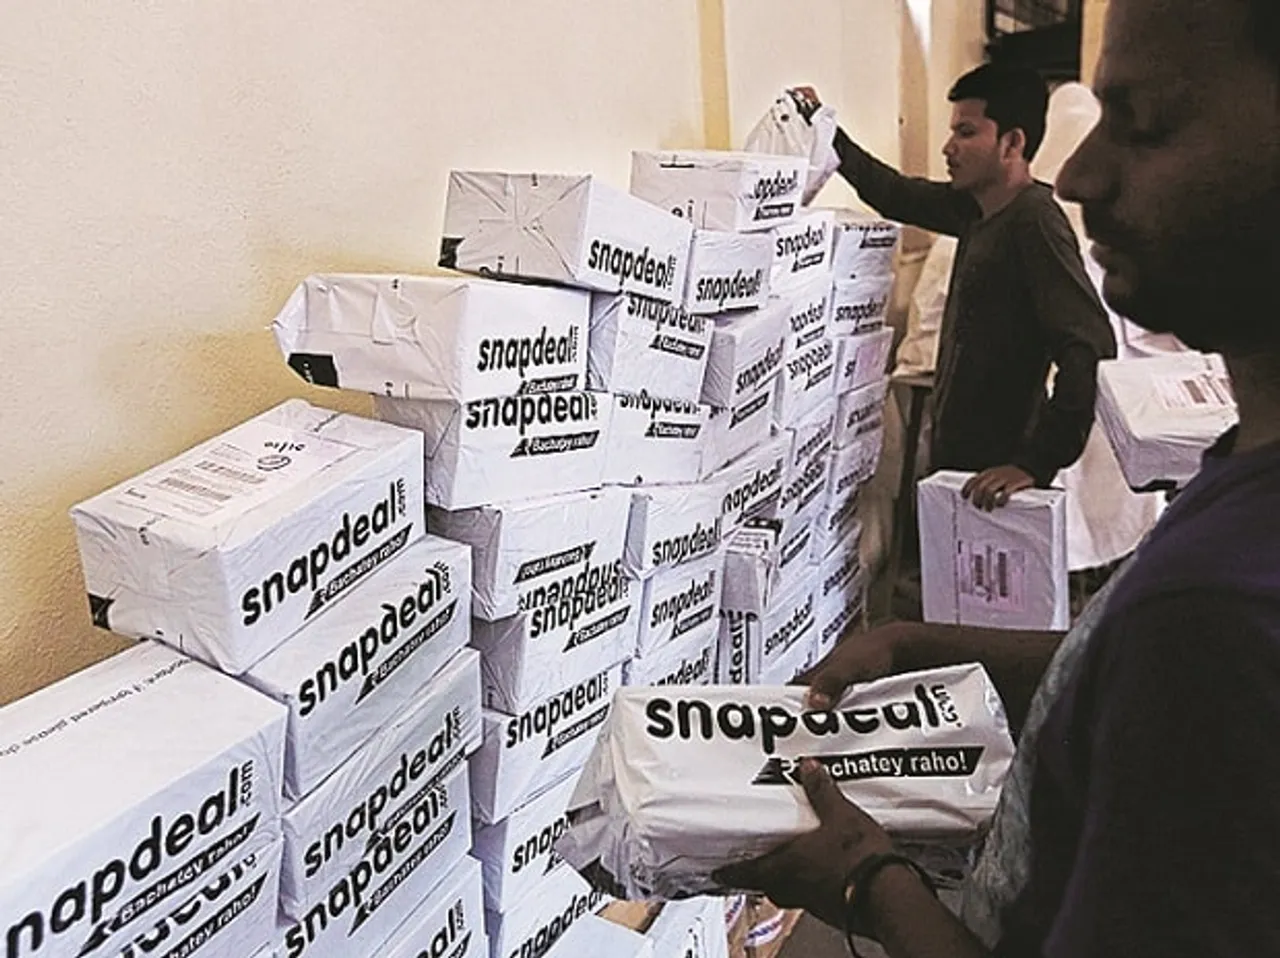 No agreement on Snapdeal sale